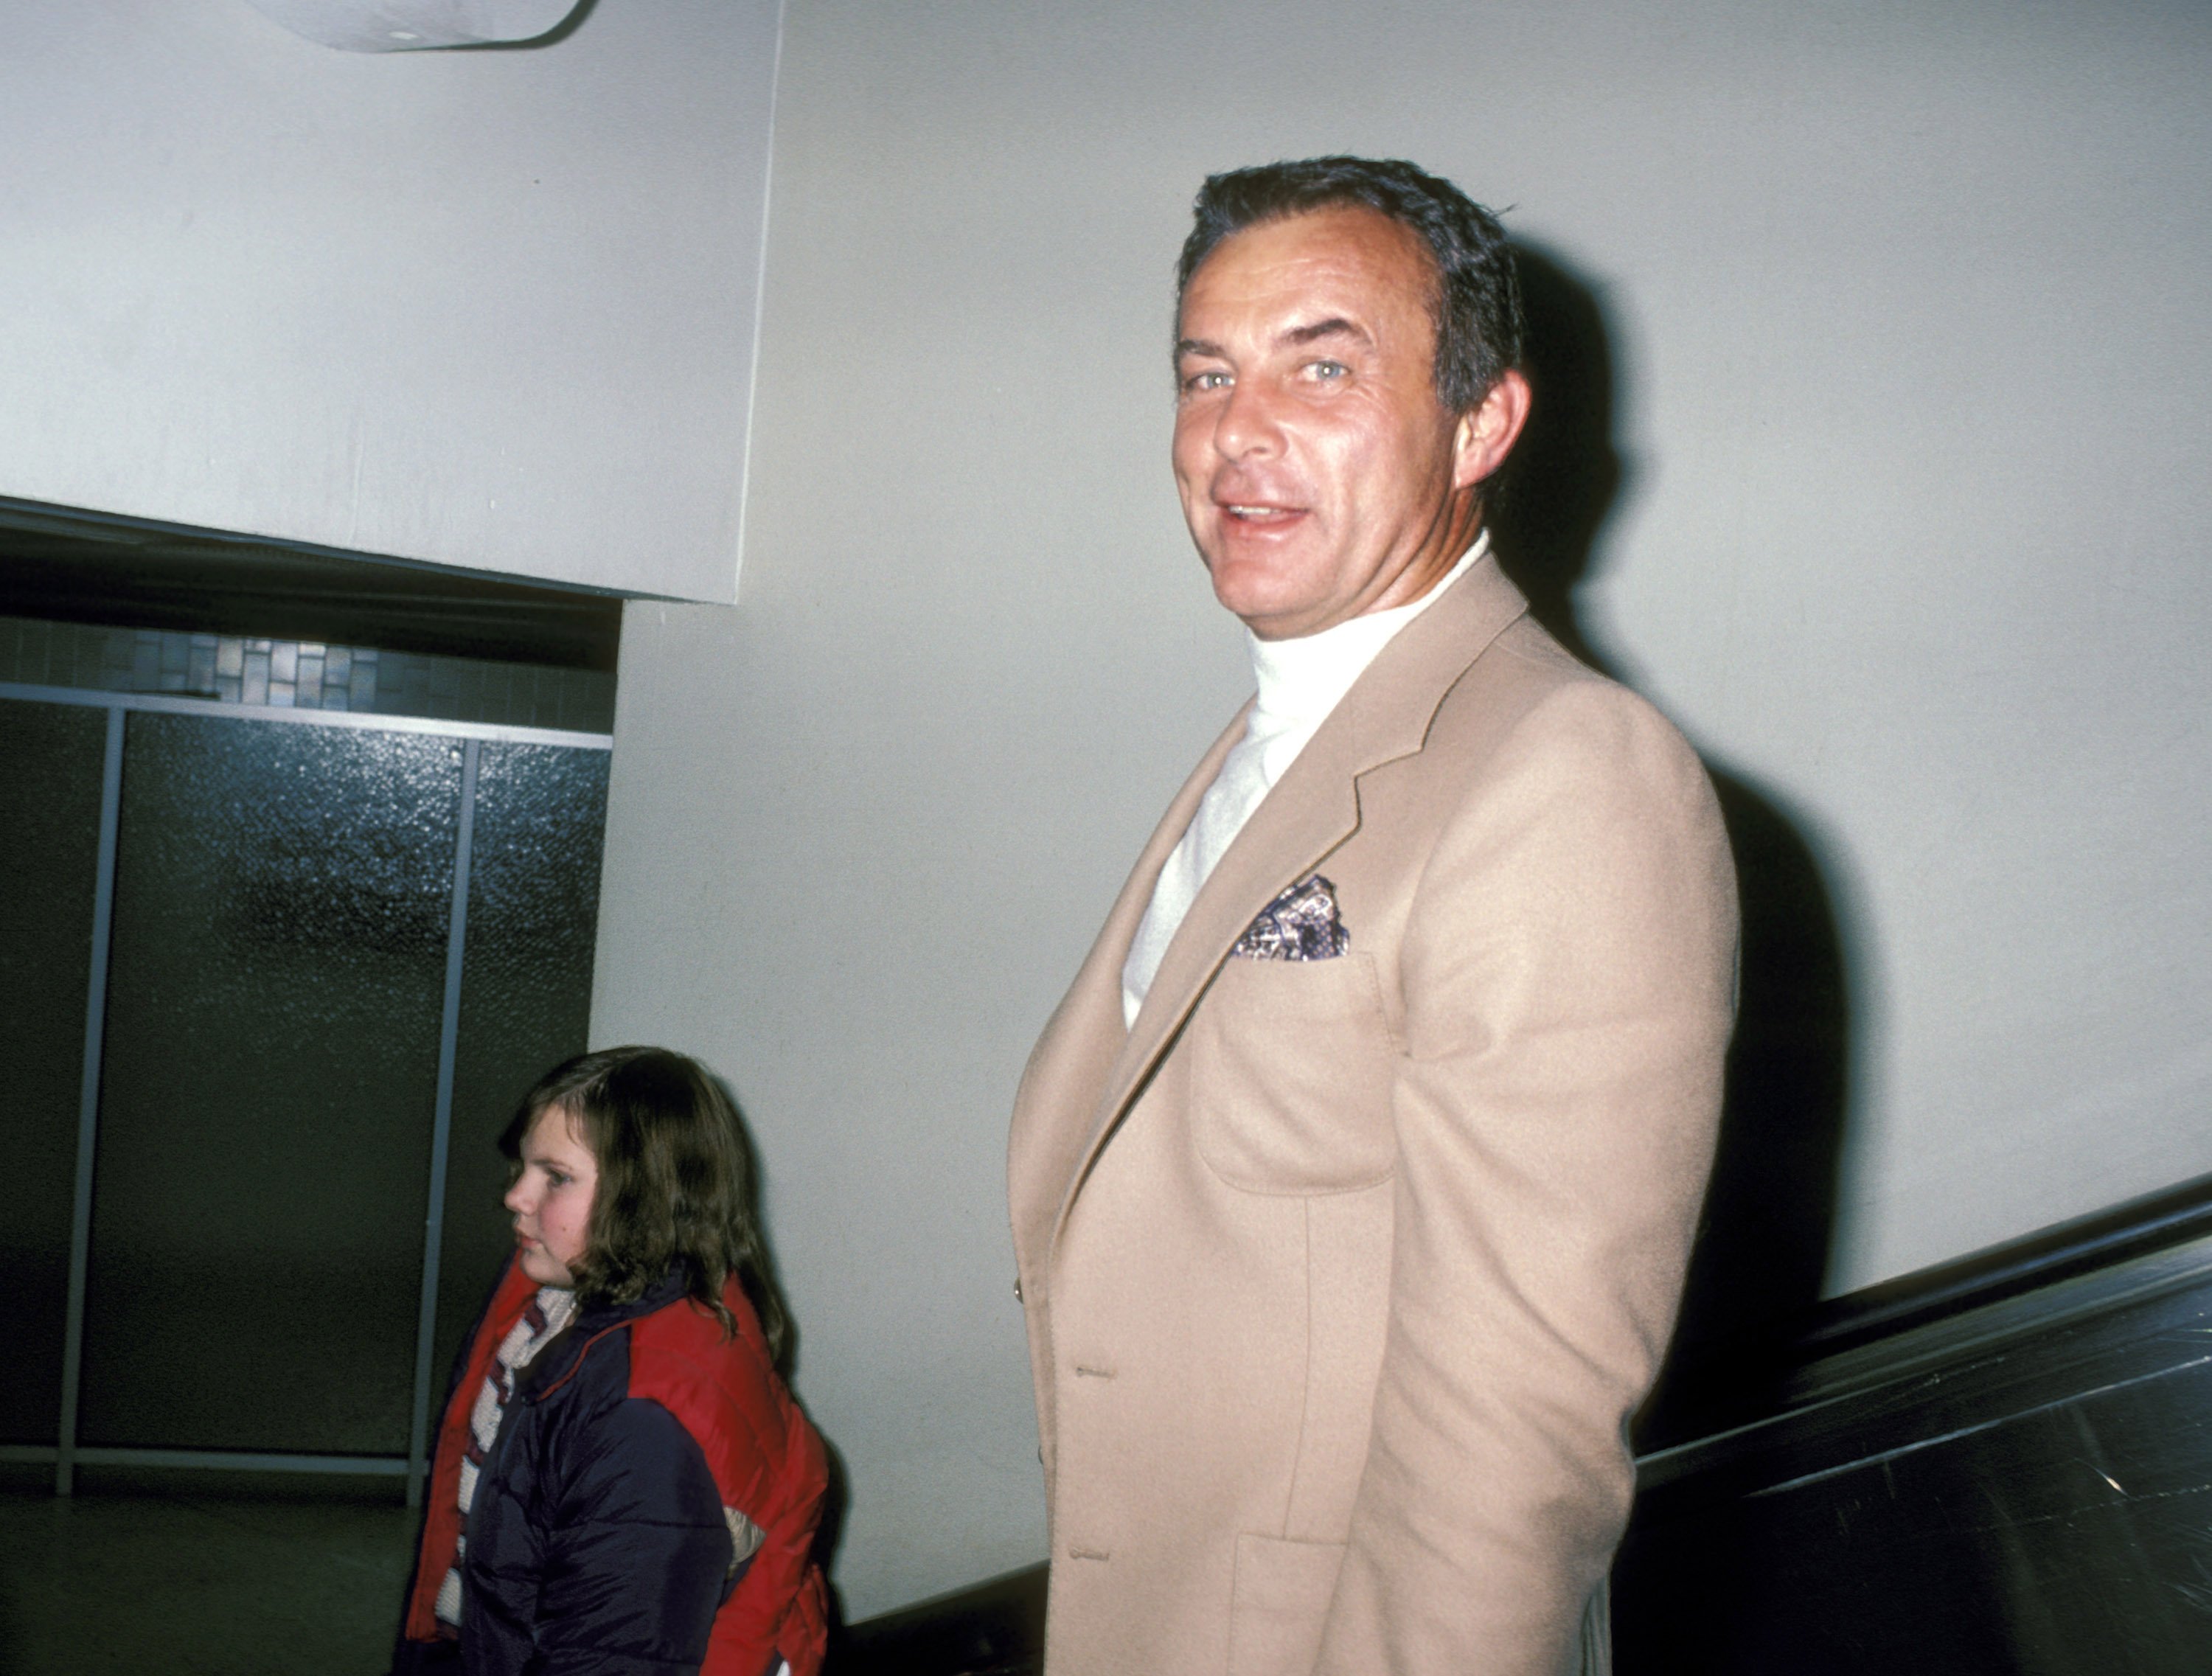 Robert Conrad at the Los Angeles International Airport on New Year's Eve in 1980 in Los Angeles, California | Photo: Ron Galella/Ron Galella Collection via Getty Images